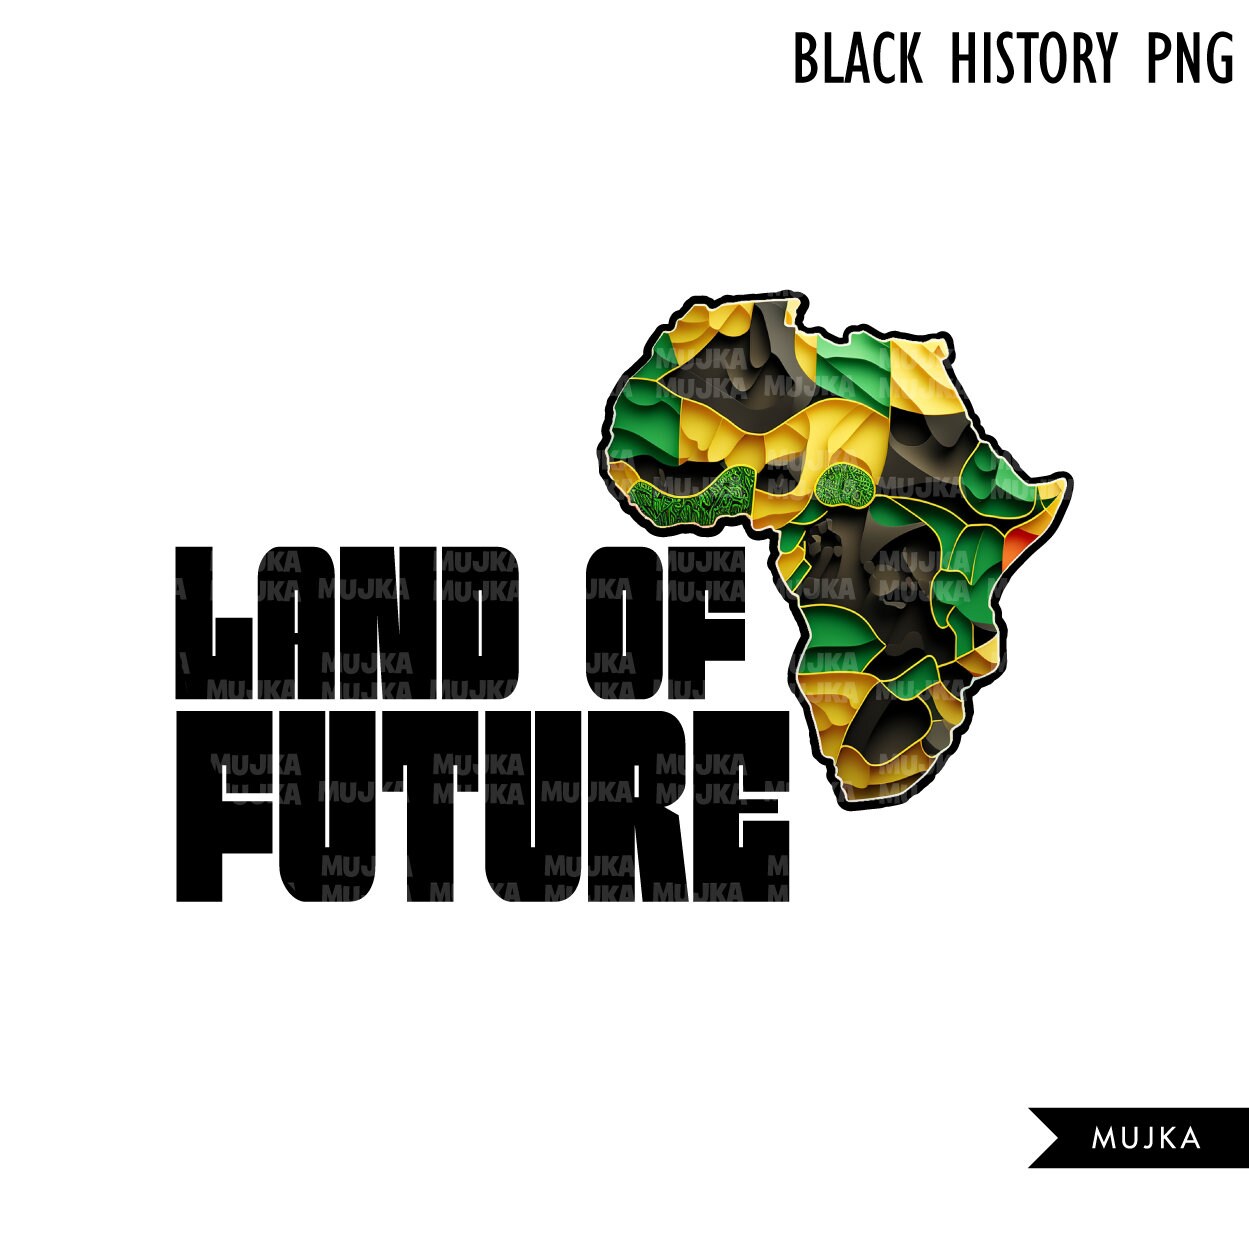 Black History Clipart, Black History Month PNG, Africa art map, sublimation designs, Africa png, Africa map designs, african wall art